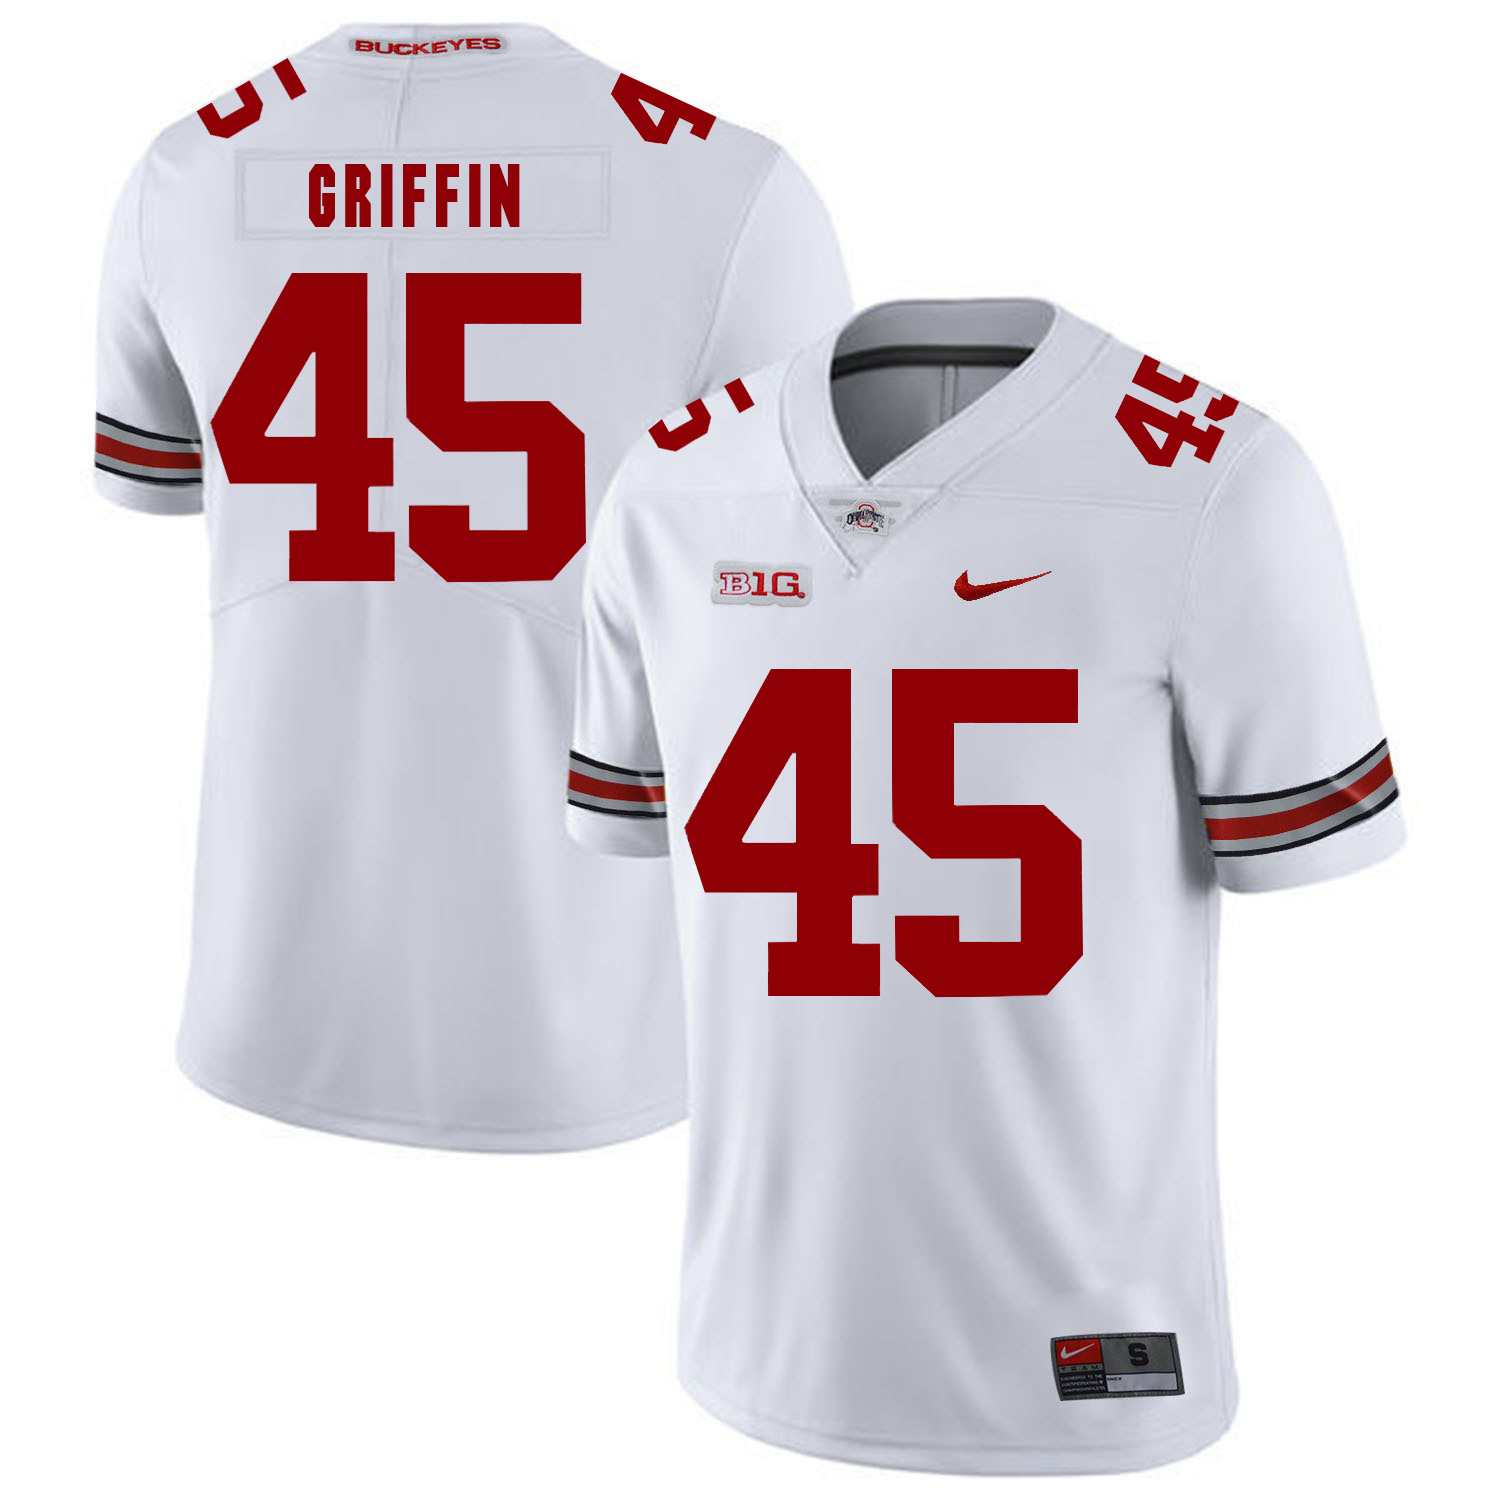 Ohio State Buckeyes 45 Archie Griffin White Nike College Football Jersey